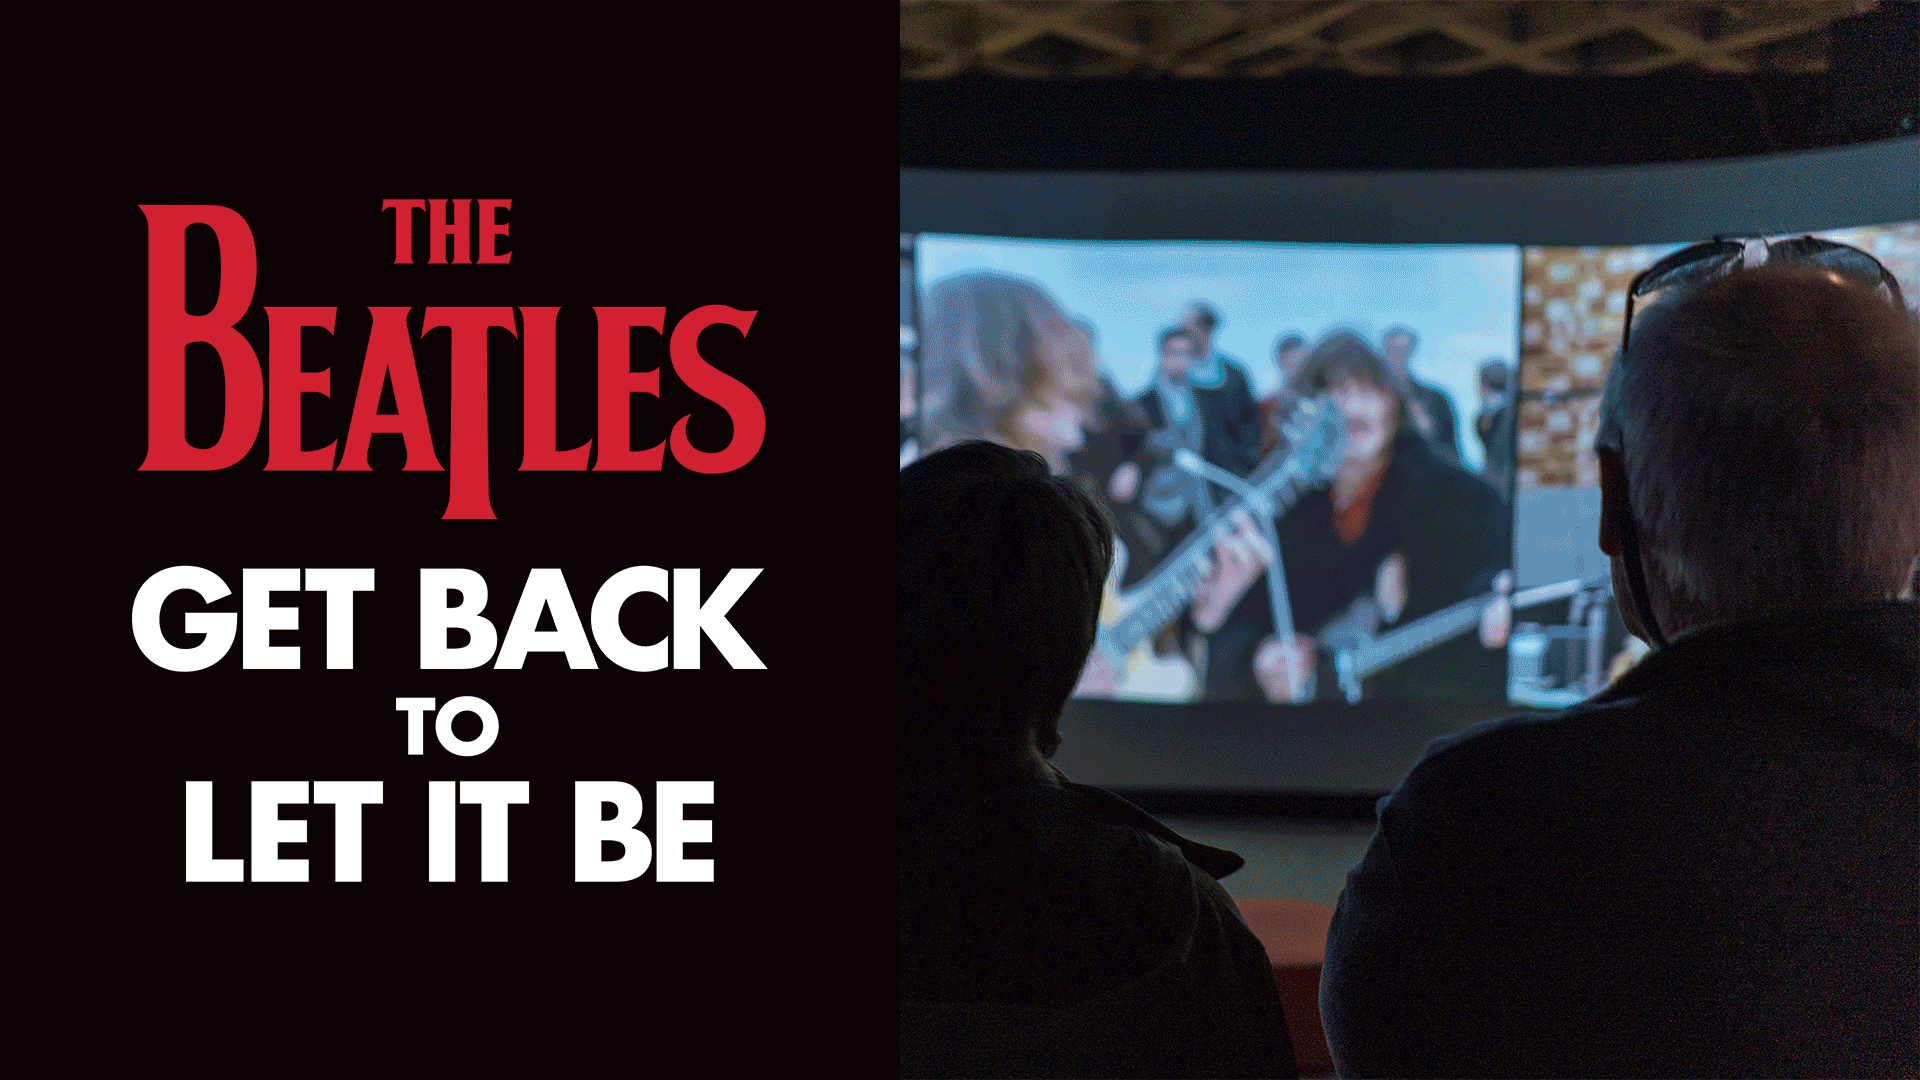 THE BEATLES GET BACK TO LET IT BE